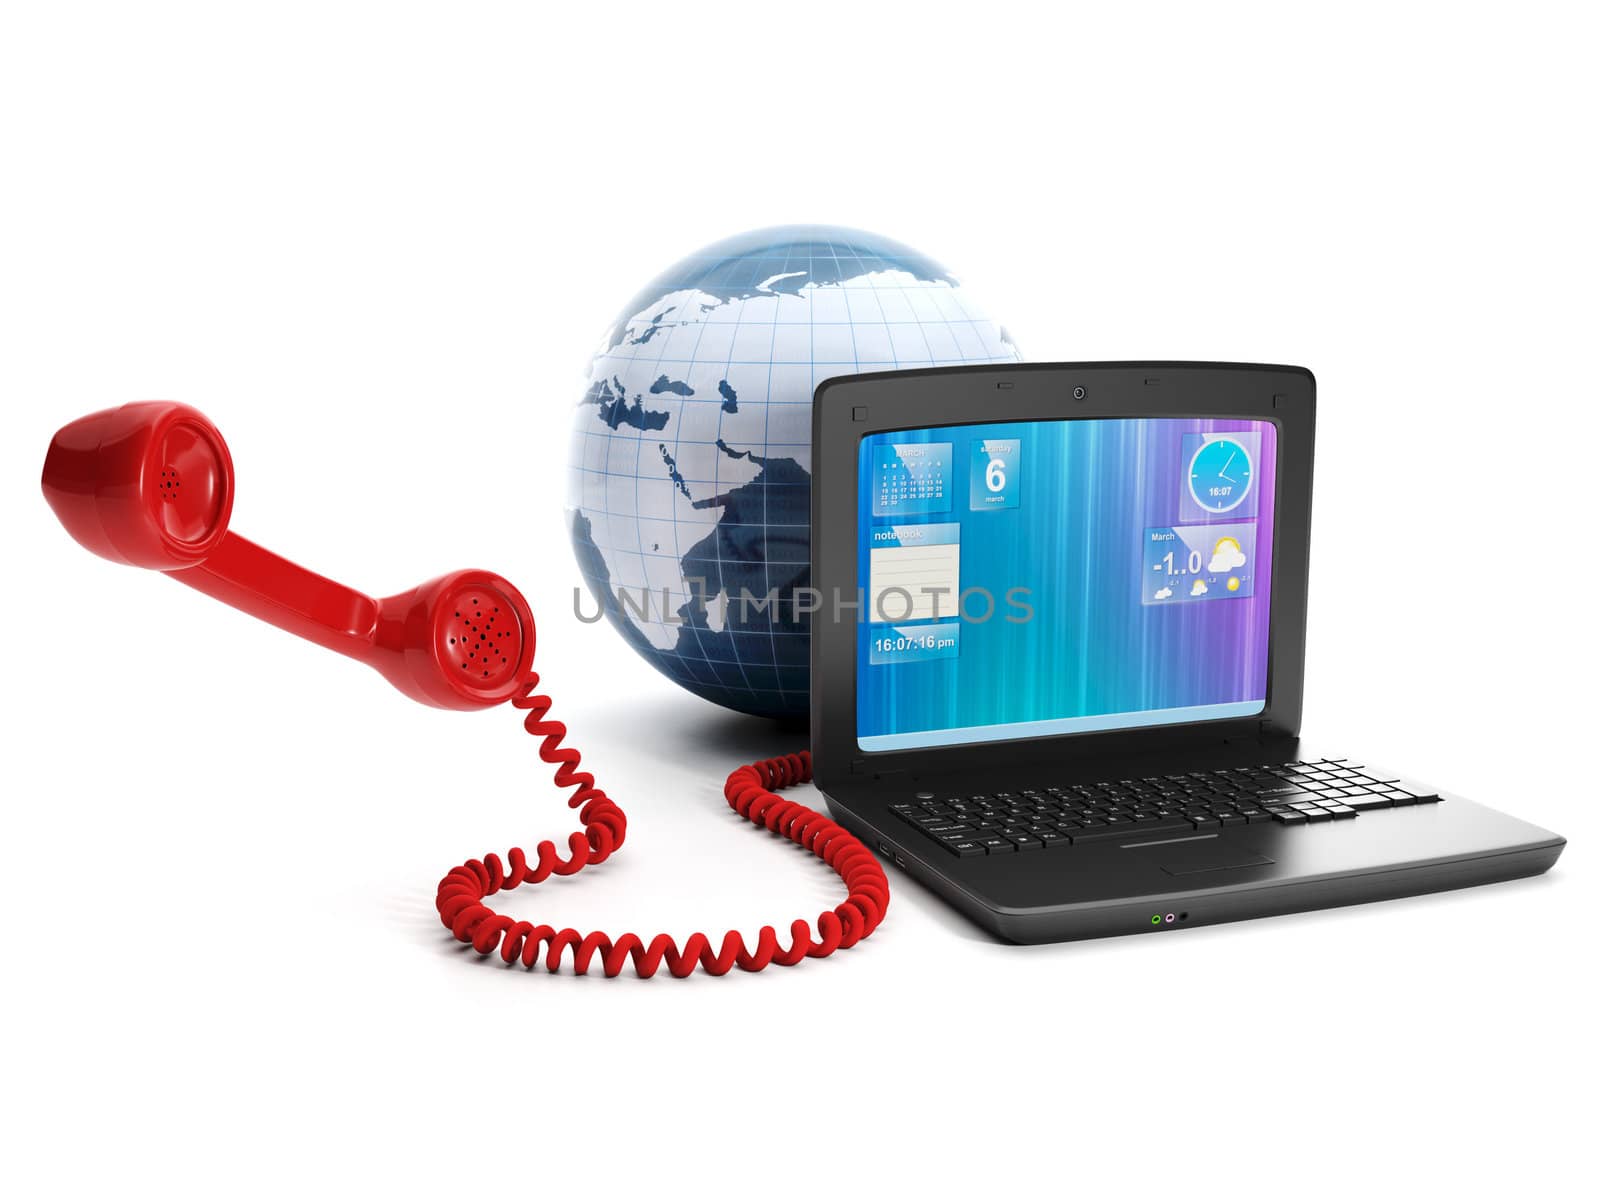 Calls via the internet to fall in love place on earth. Laptop land and the handset on a white background